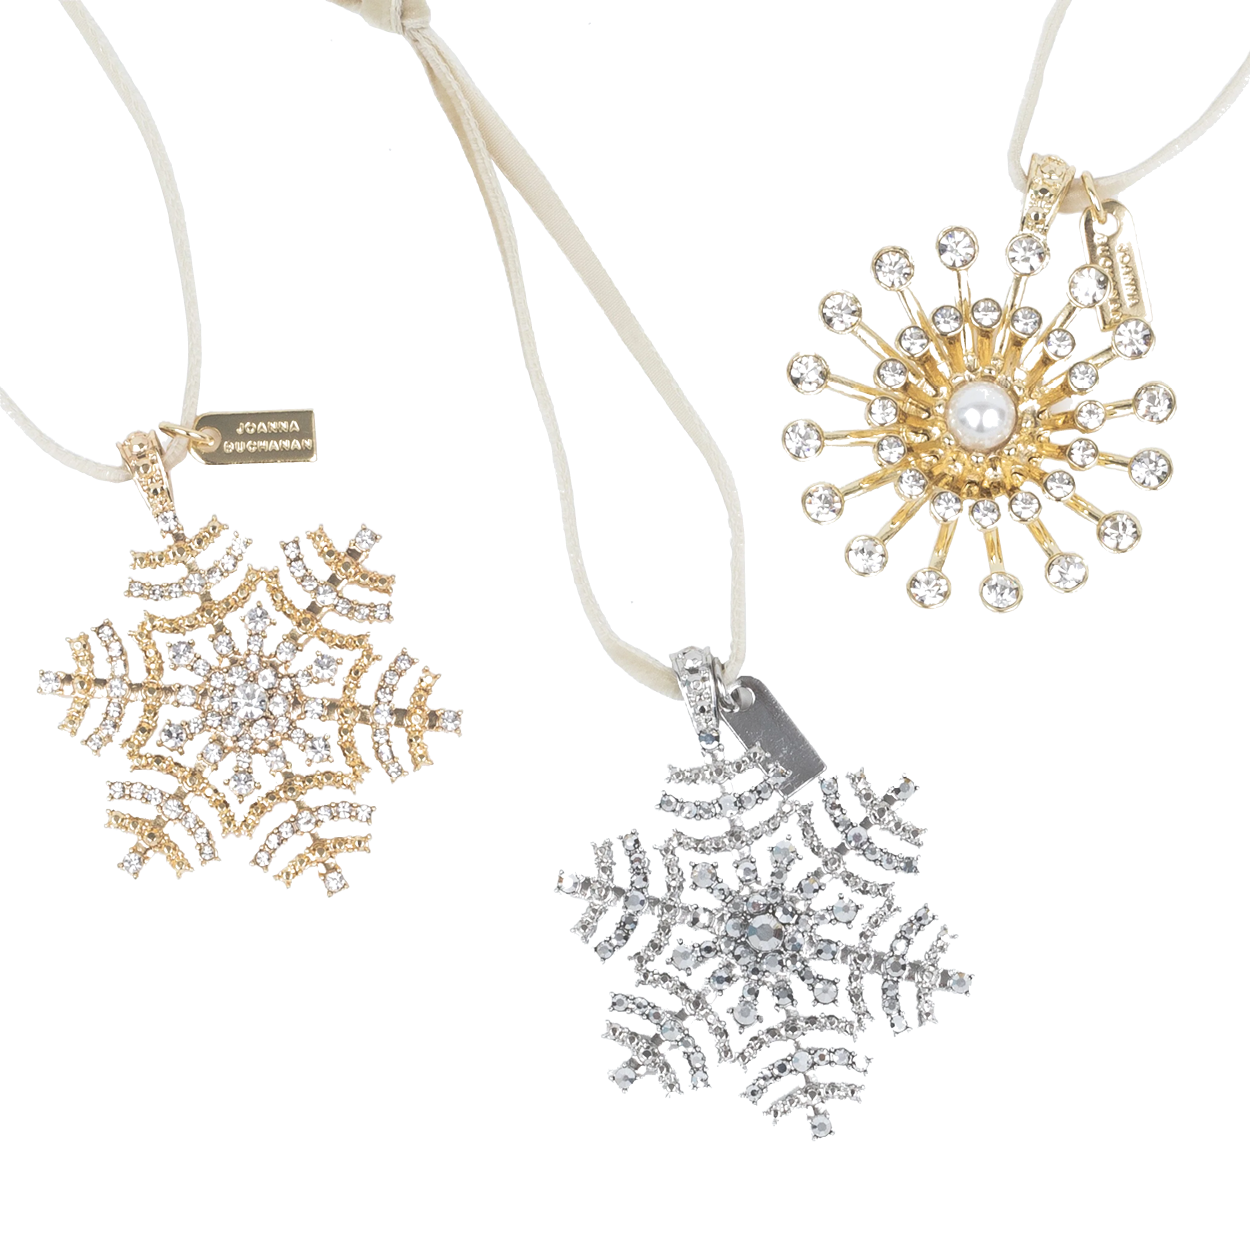 Joanna Buchanan Snowflake Ornament Gift Set- Diane James Home | Faux Floral Couture Handmade In The USA